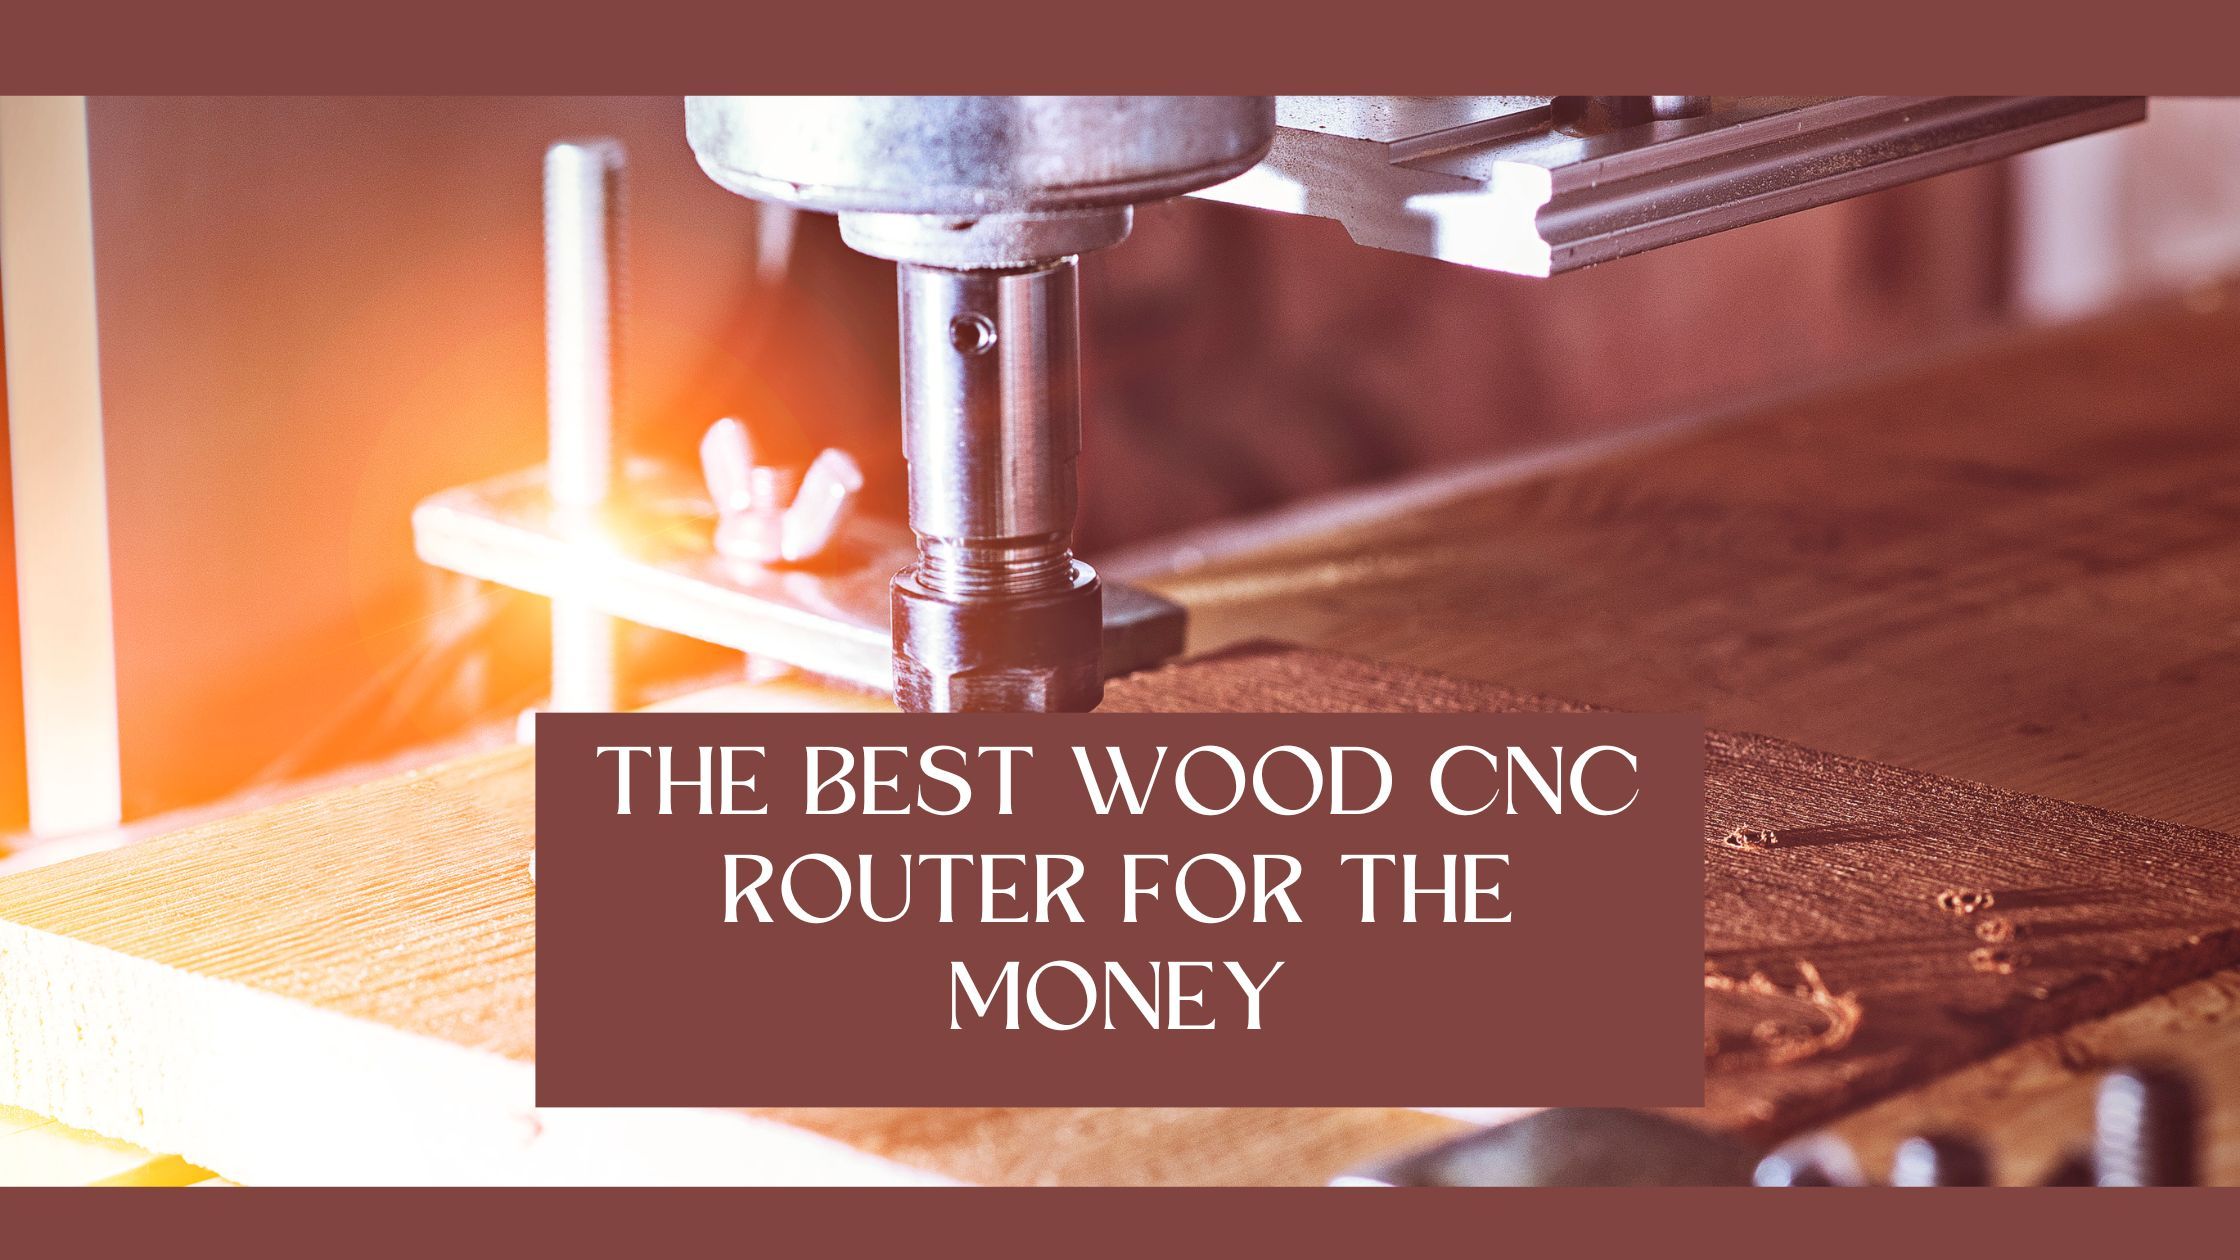 The Best Wood CNC Router for the Money